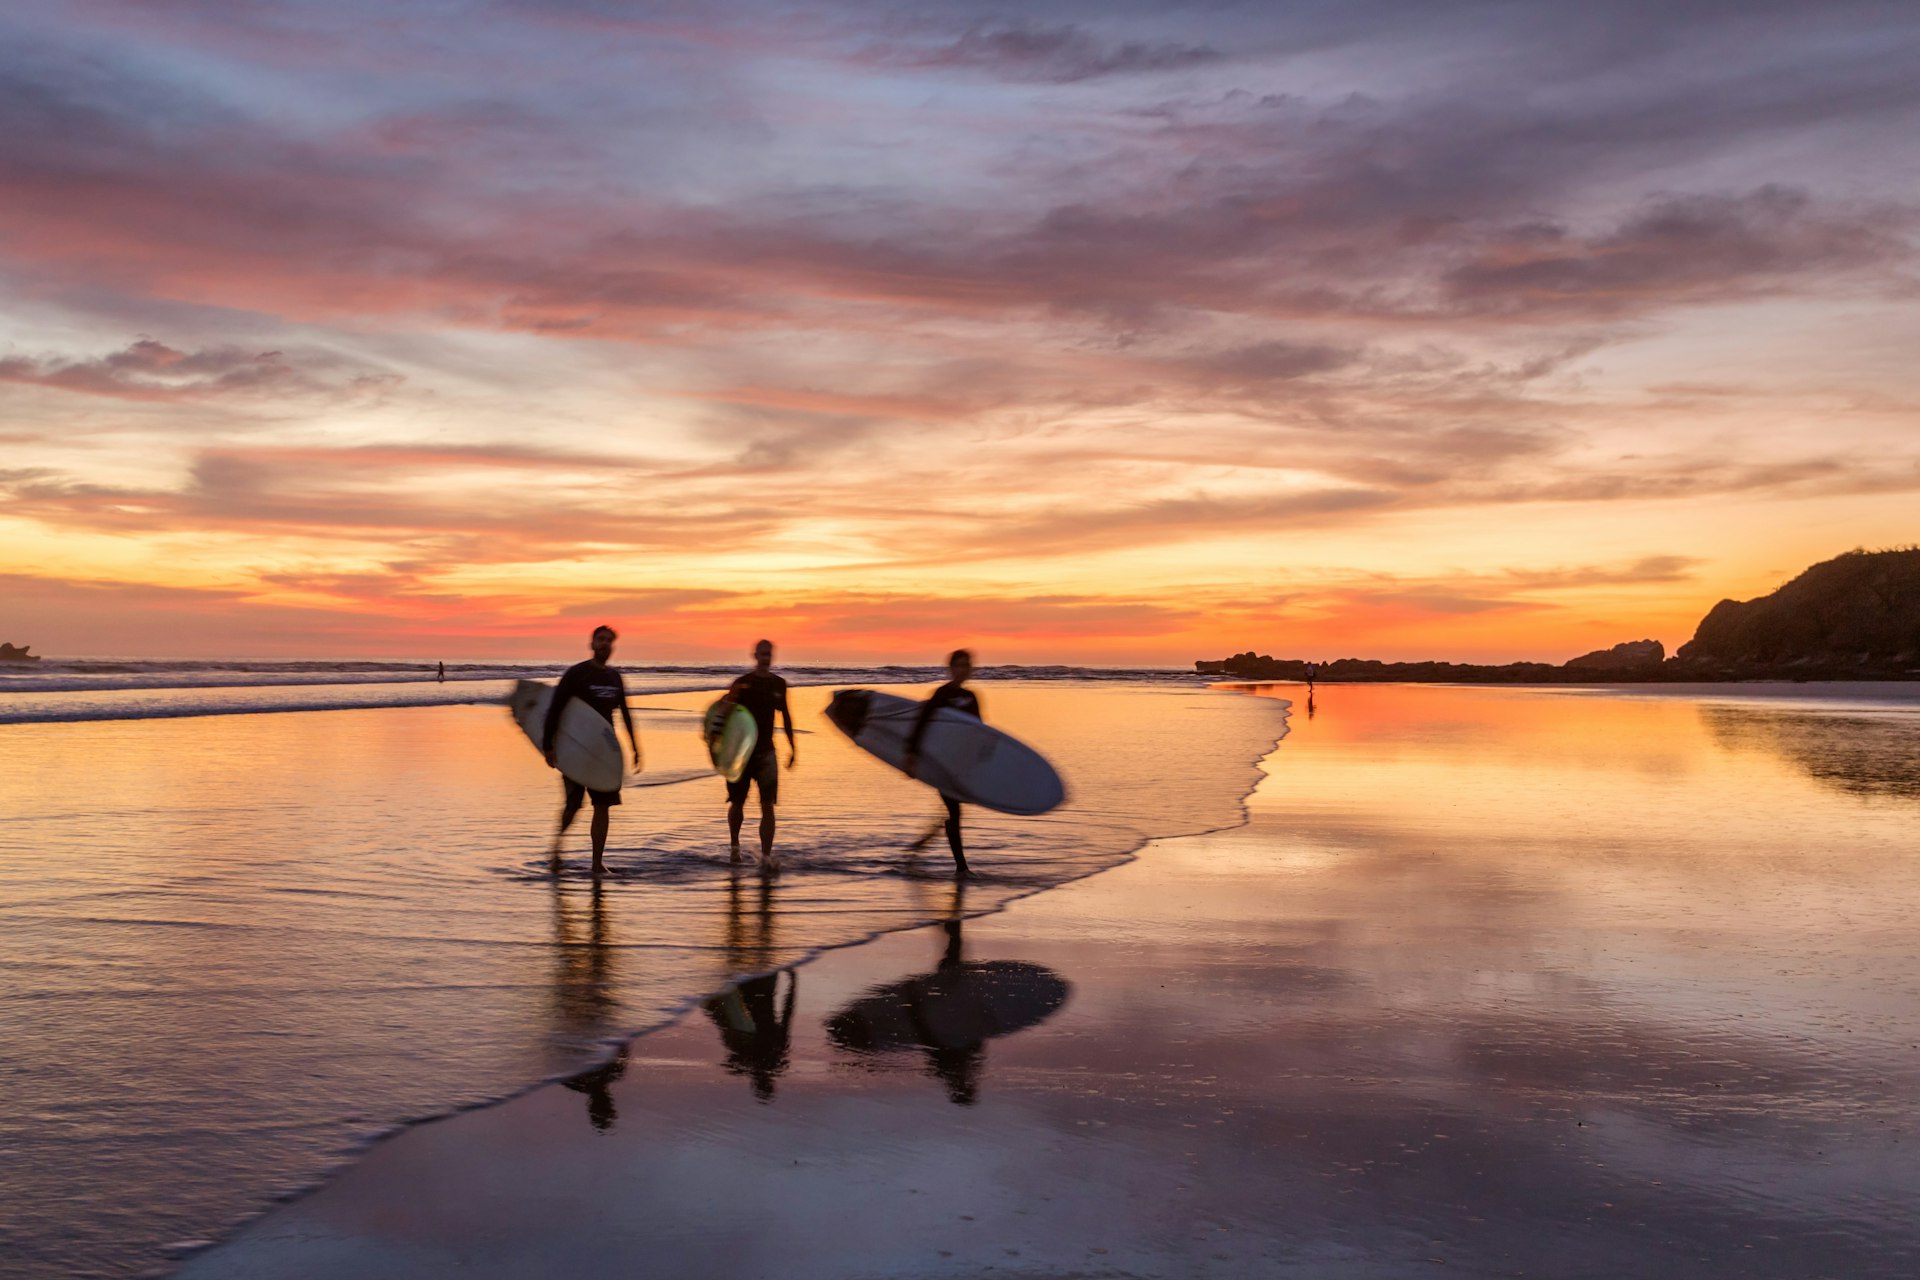 Surfers at sunset walking on beach, Costa Rica. 